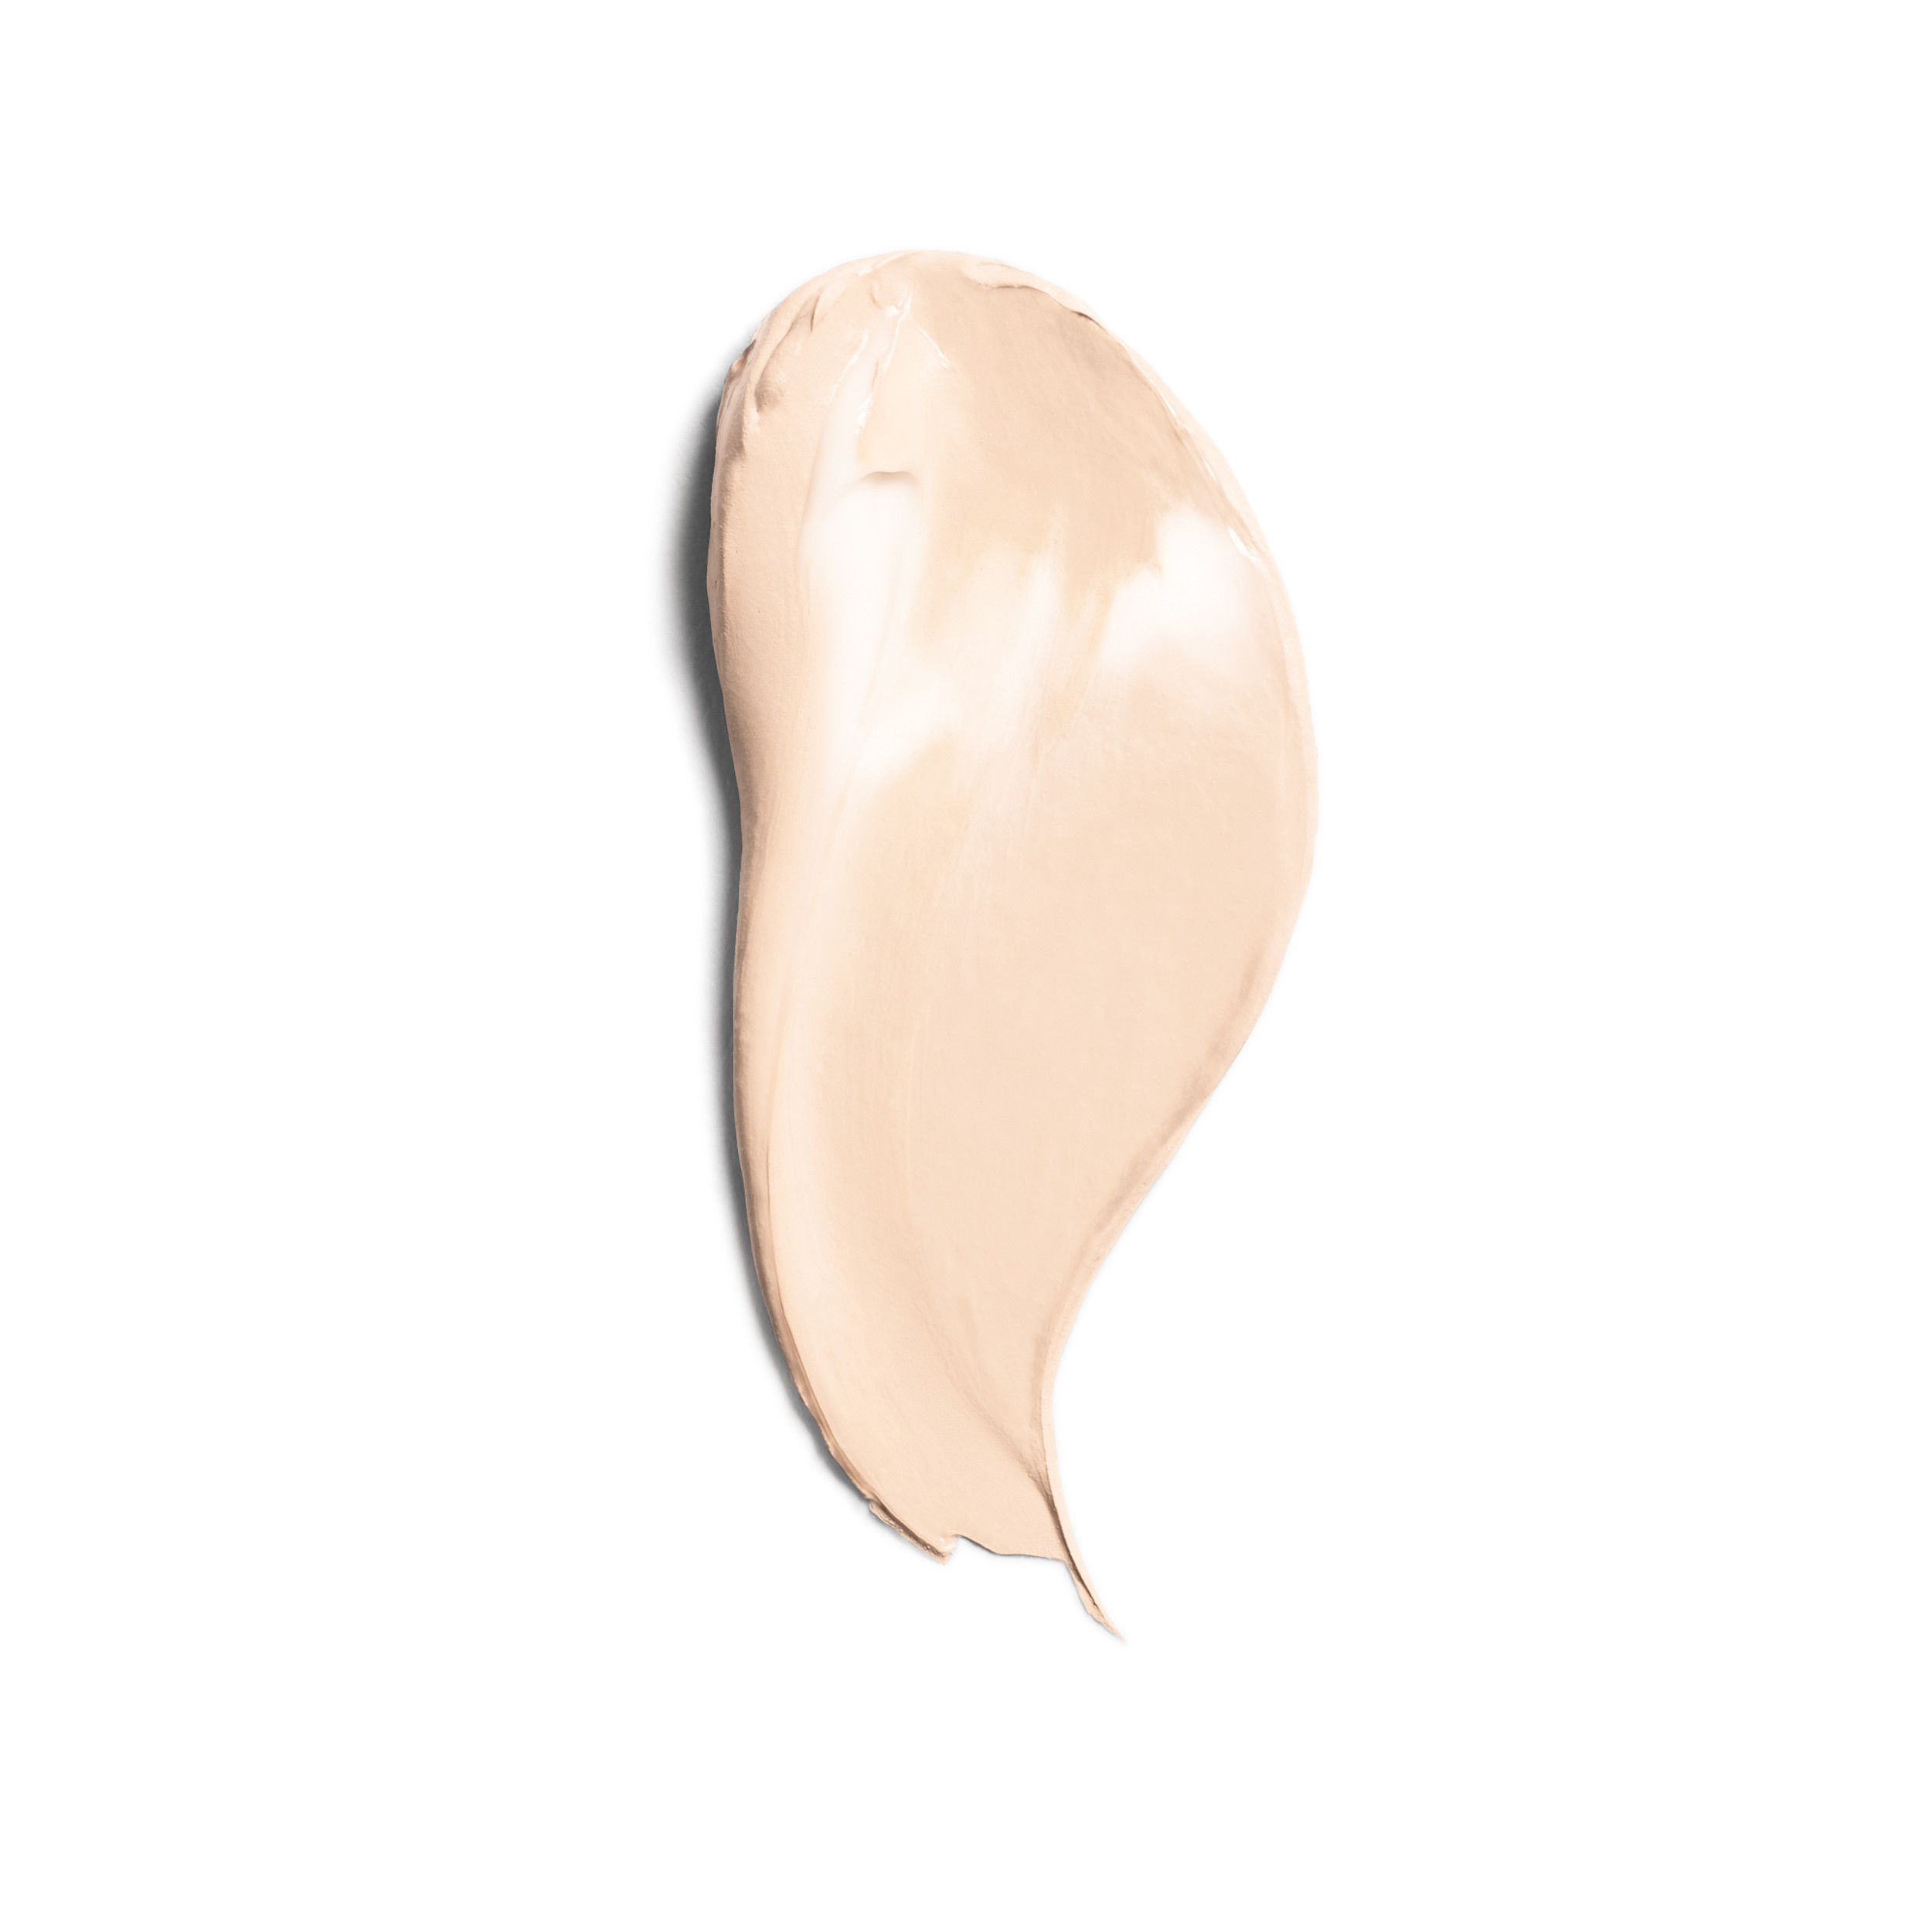 COVERGIRL + OLAY Simply Ageless Instant Wrinkle-Defying Foundation with SPF 28, Ivory, 0.44 oz - image 3 of 9